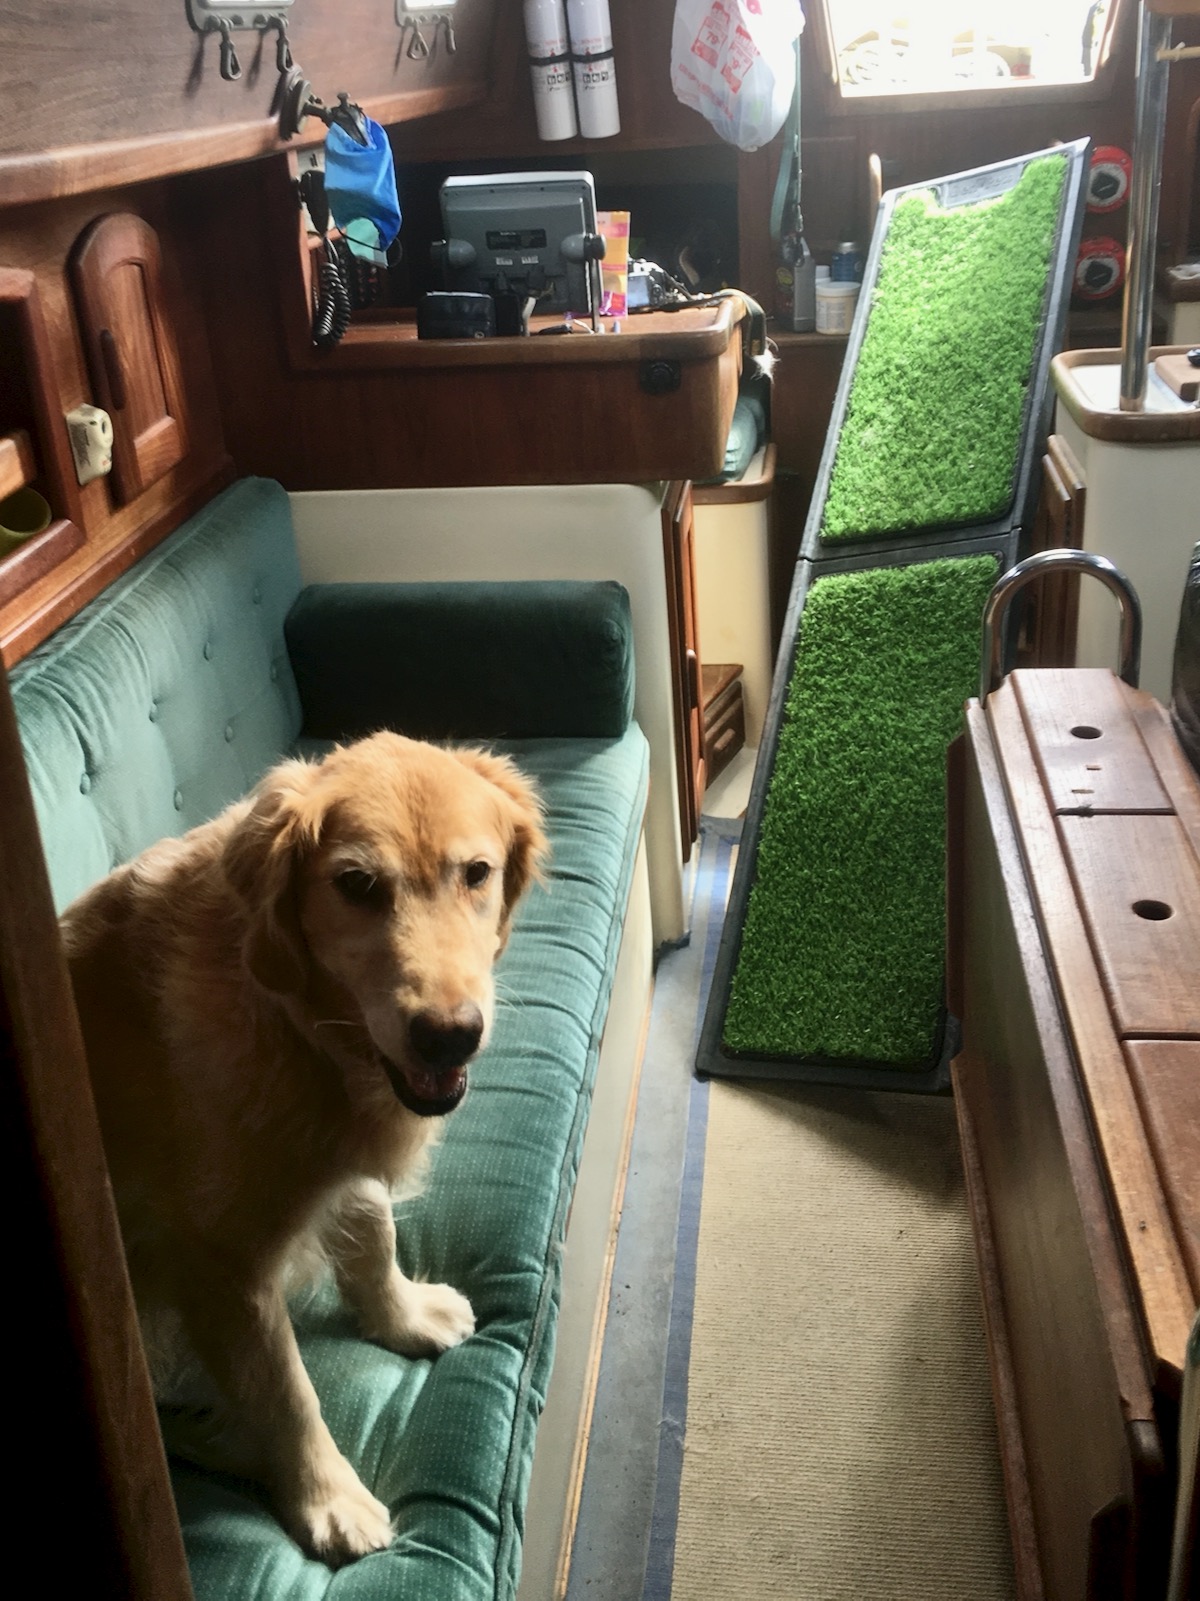 Make sure the dog ramp will fit where you want to use it - Golden retriever in boat cabin with crooked ramp leading into the opening.